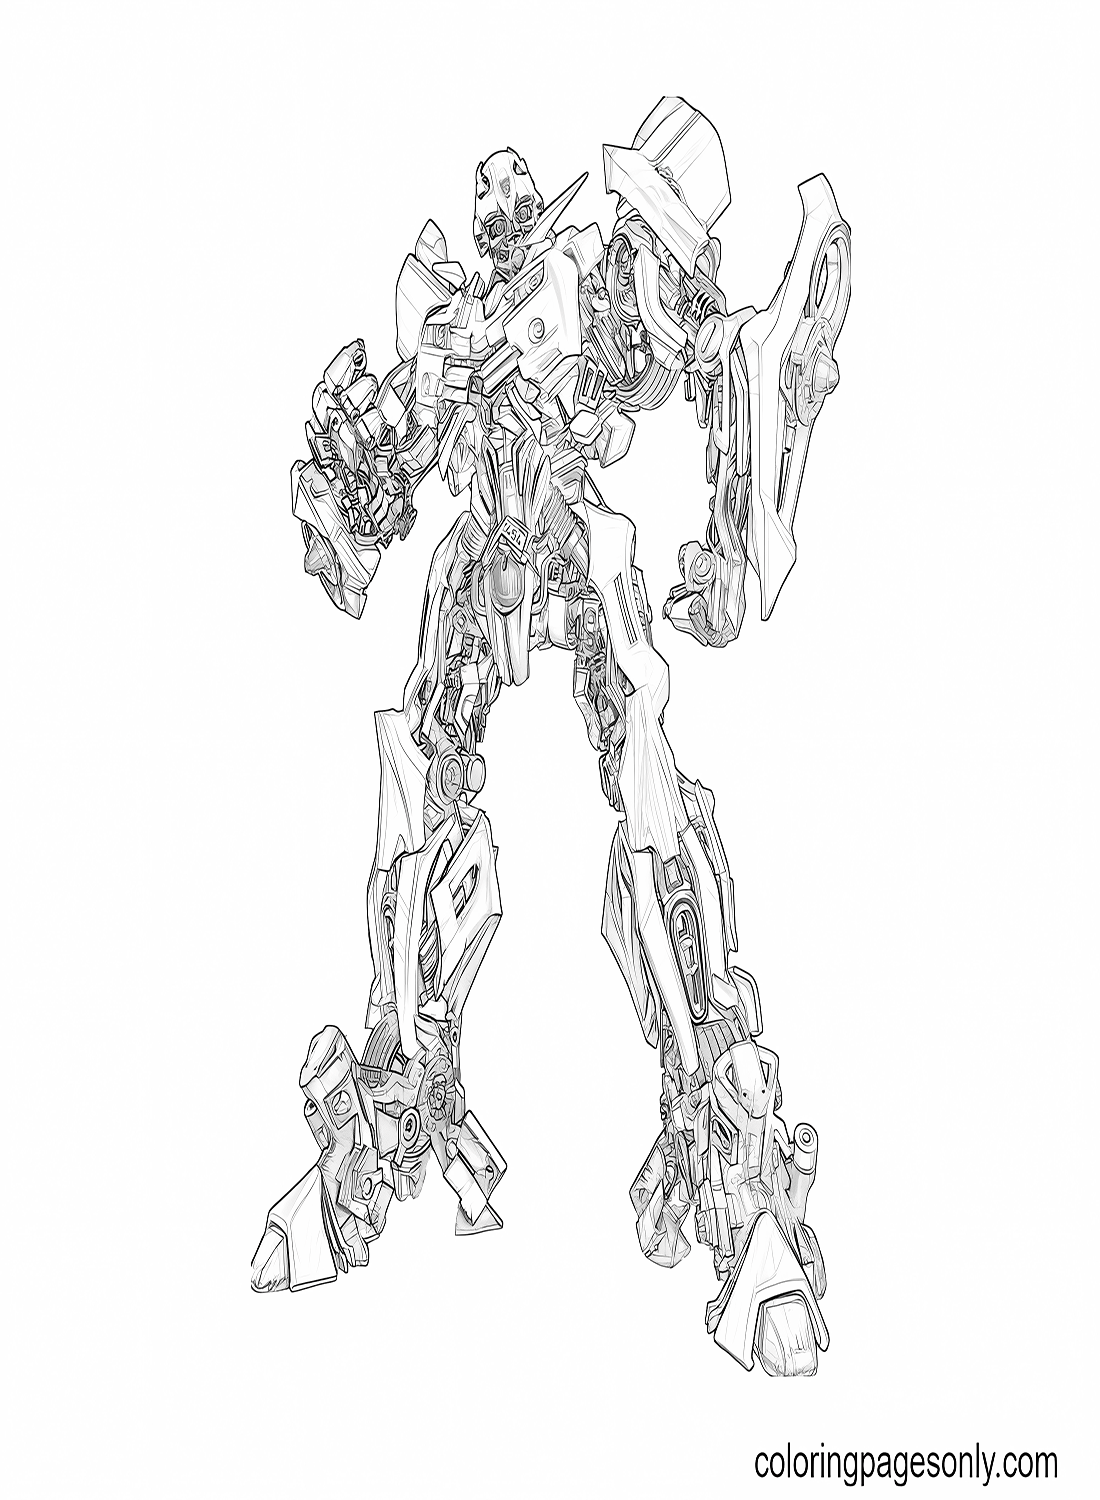 Transformers Bumblebee Printable Coloring Page